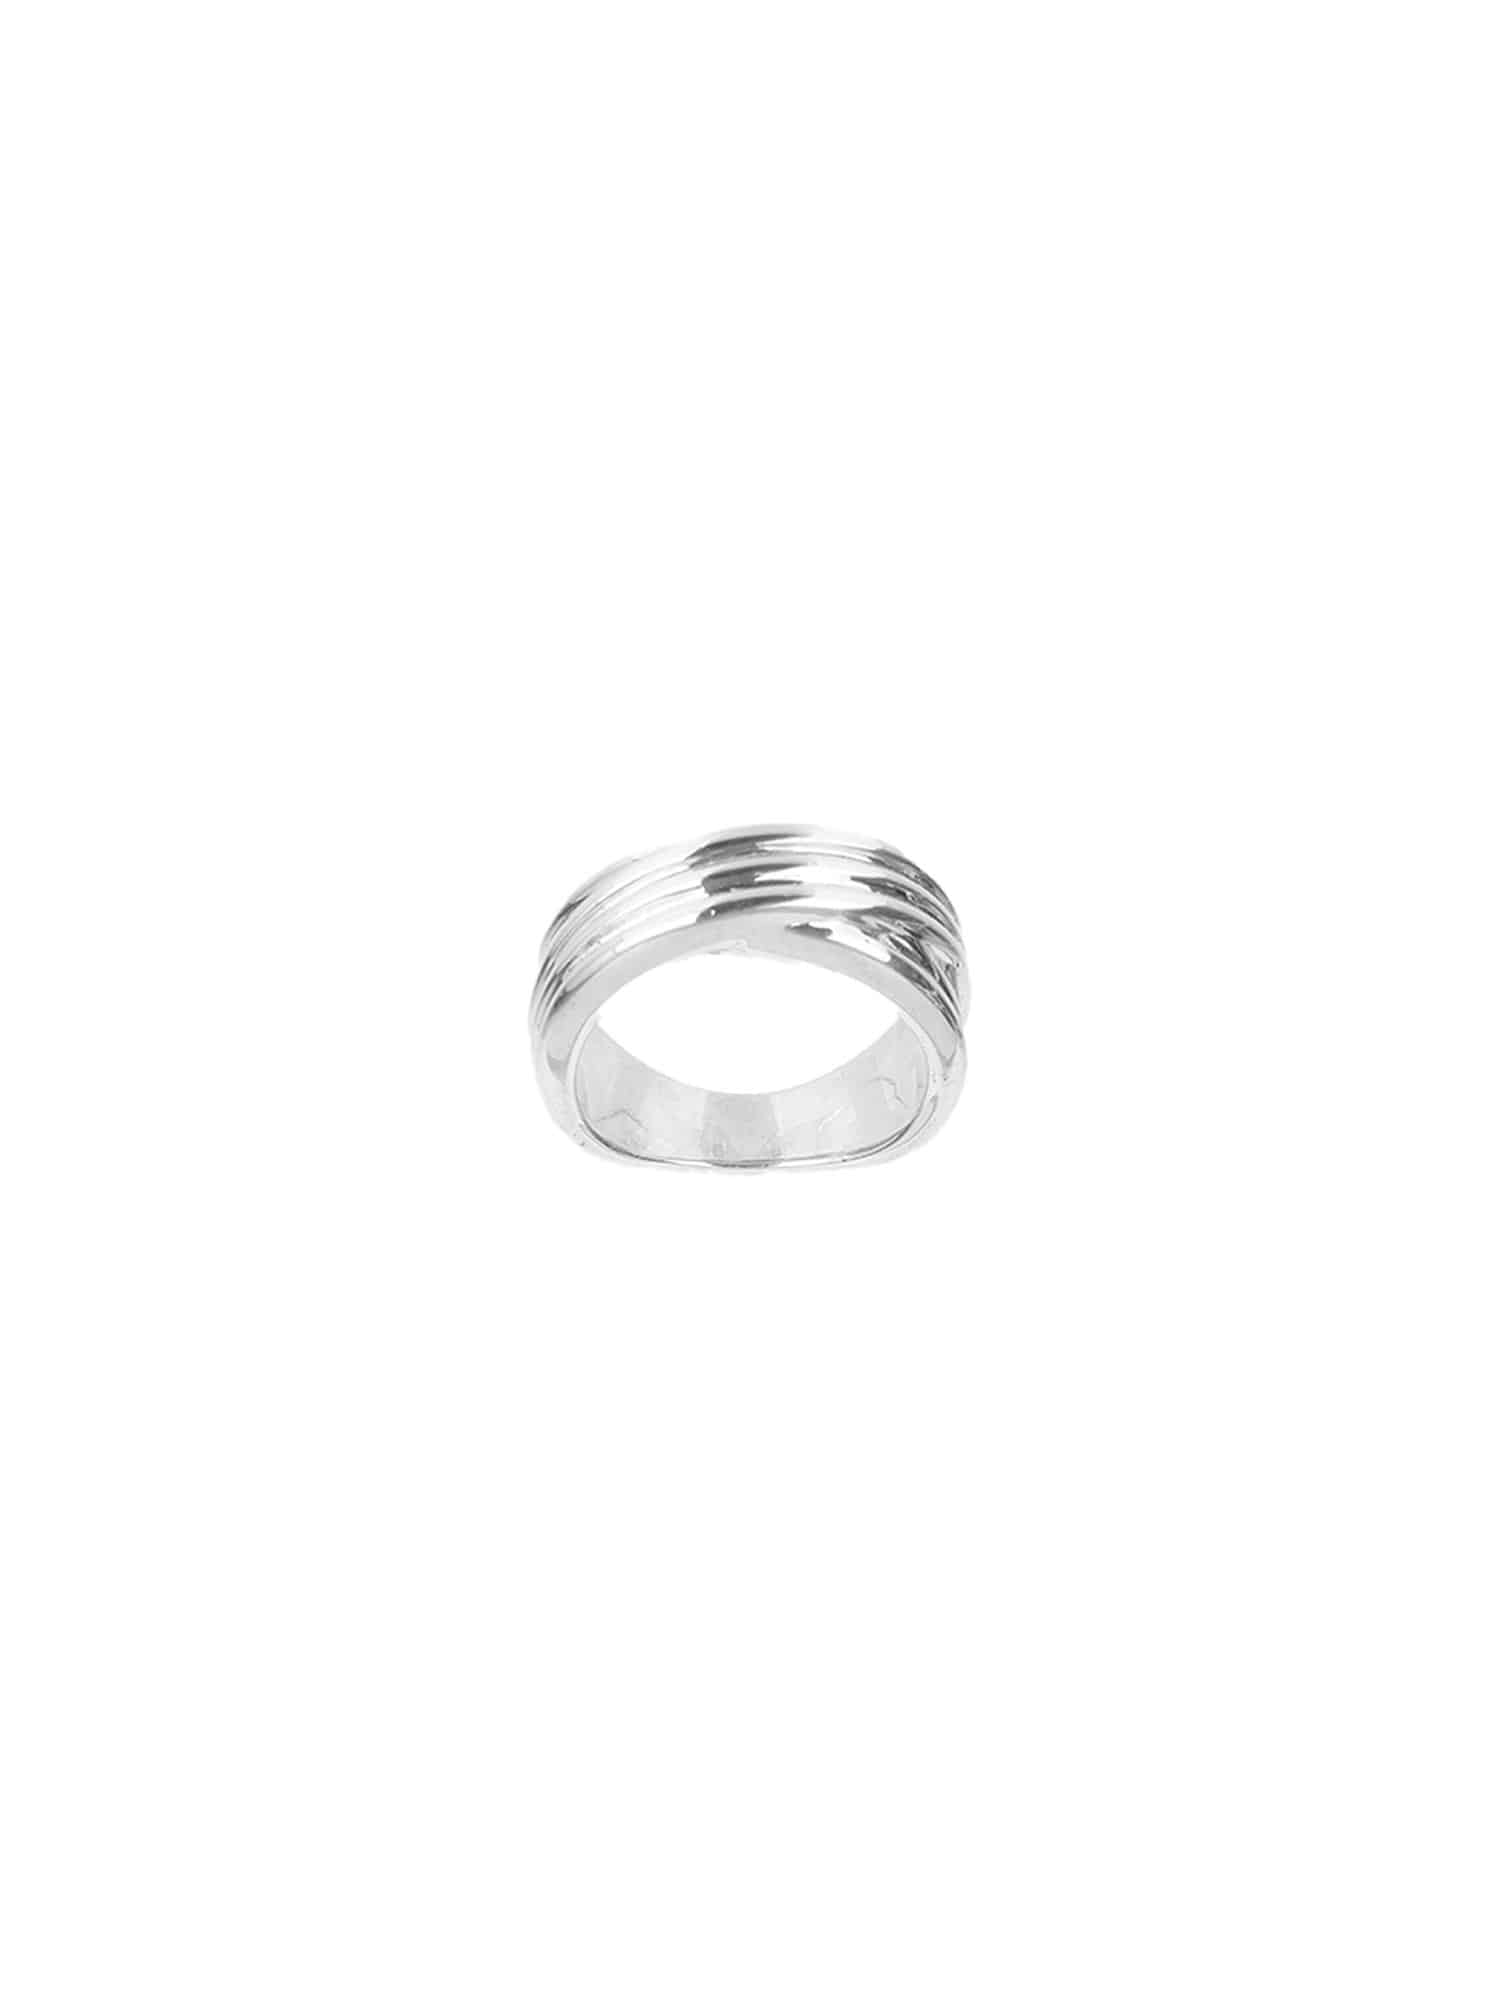 Tangle Ring - Small